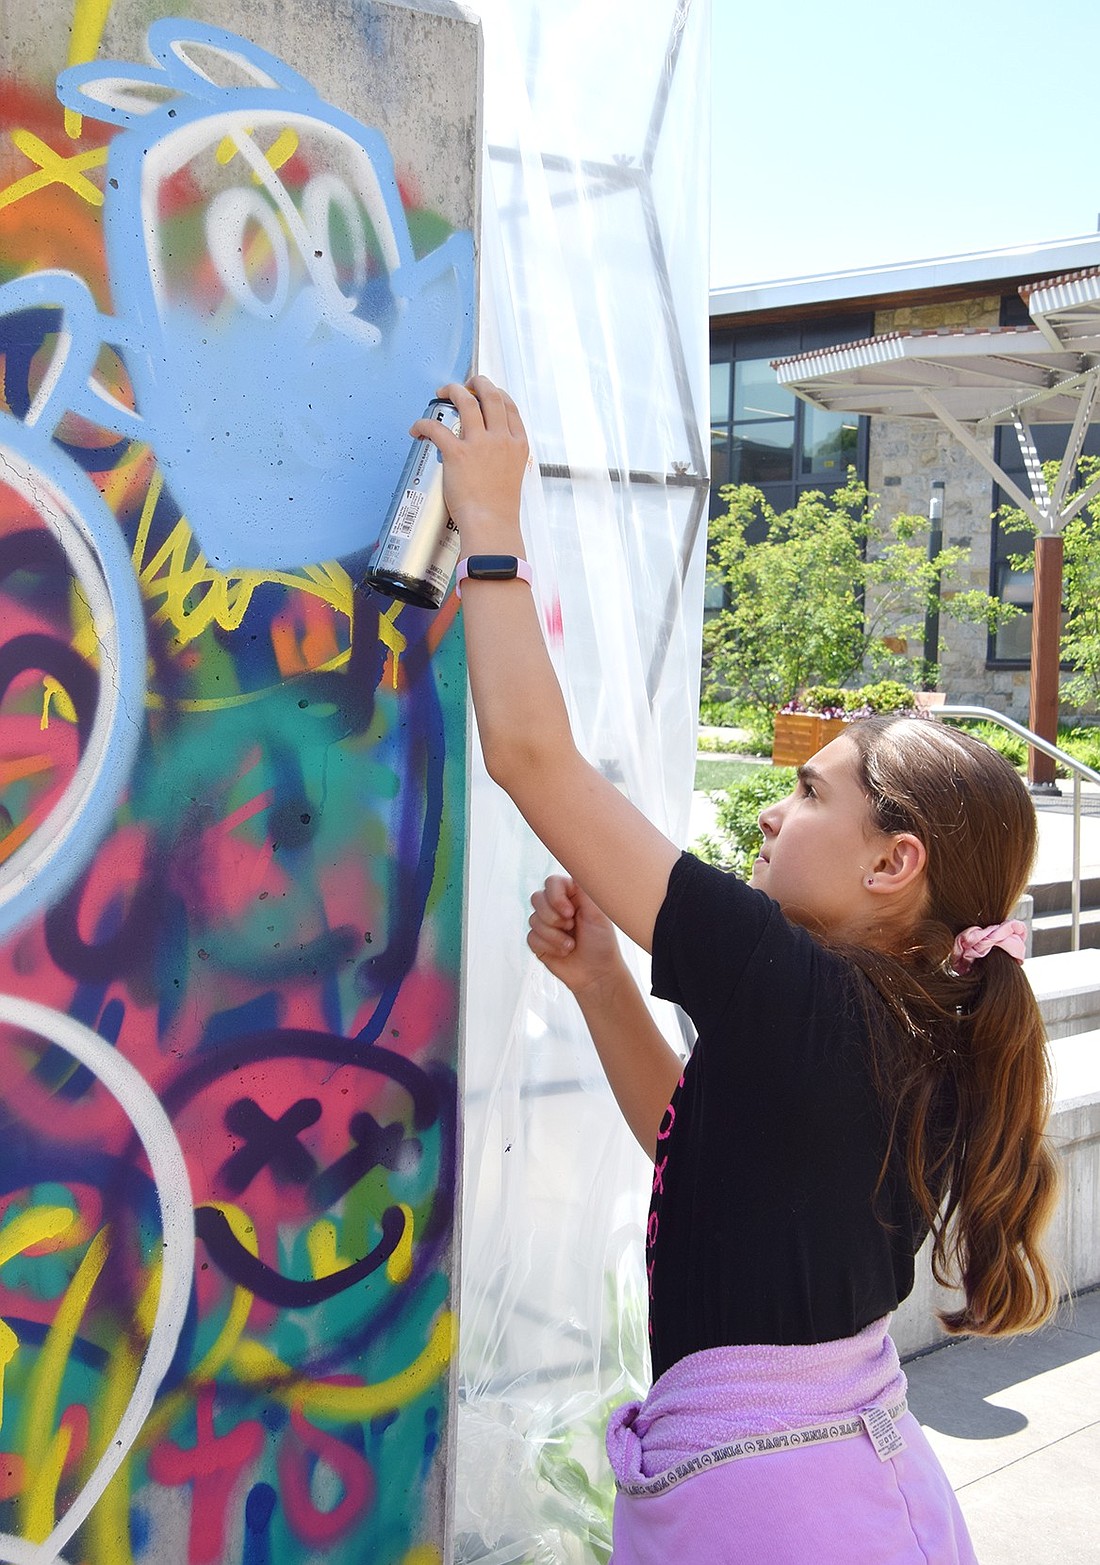 Ridge Street Elementary School fifth-grader Emily Rosen uses spray paint to fill in a bluebird on a new mural in the school’s courtyard on May 21. With guidance through the school’s Artist in Residency program, the entire fifth-grade class left their mark on the building while learning about the tact and style of street art.